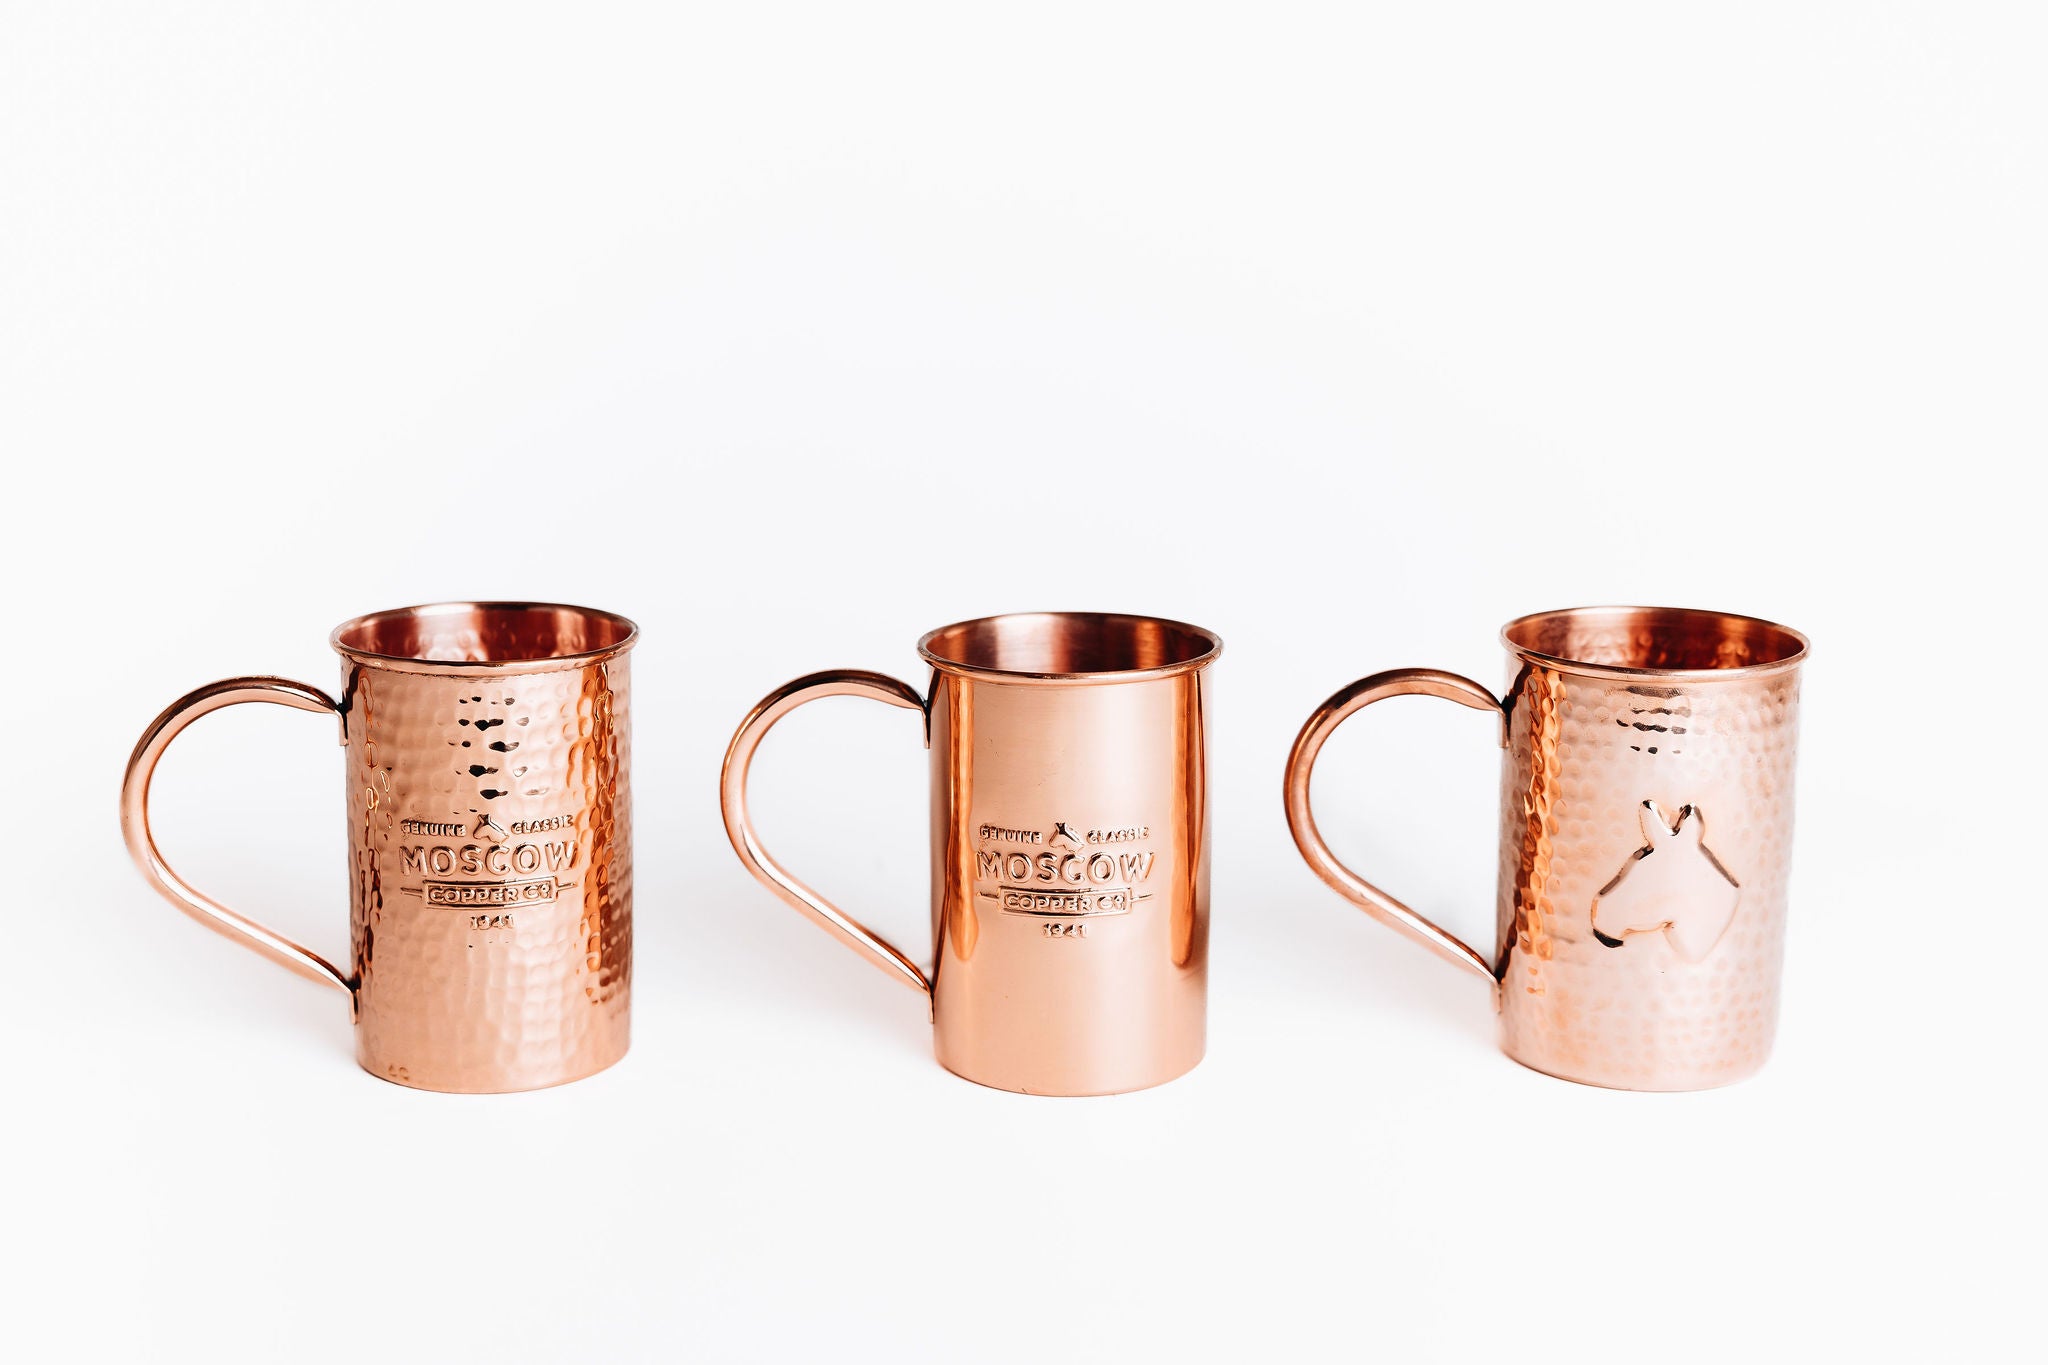 Vintage-Inspired Copper Moscow Mule Mugs with Handcrafted Handle (Set of 4)  - Cocktail Glasses & Barware on Food52